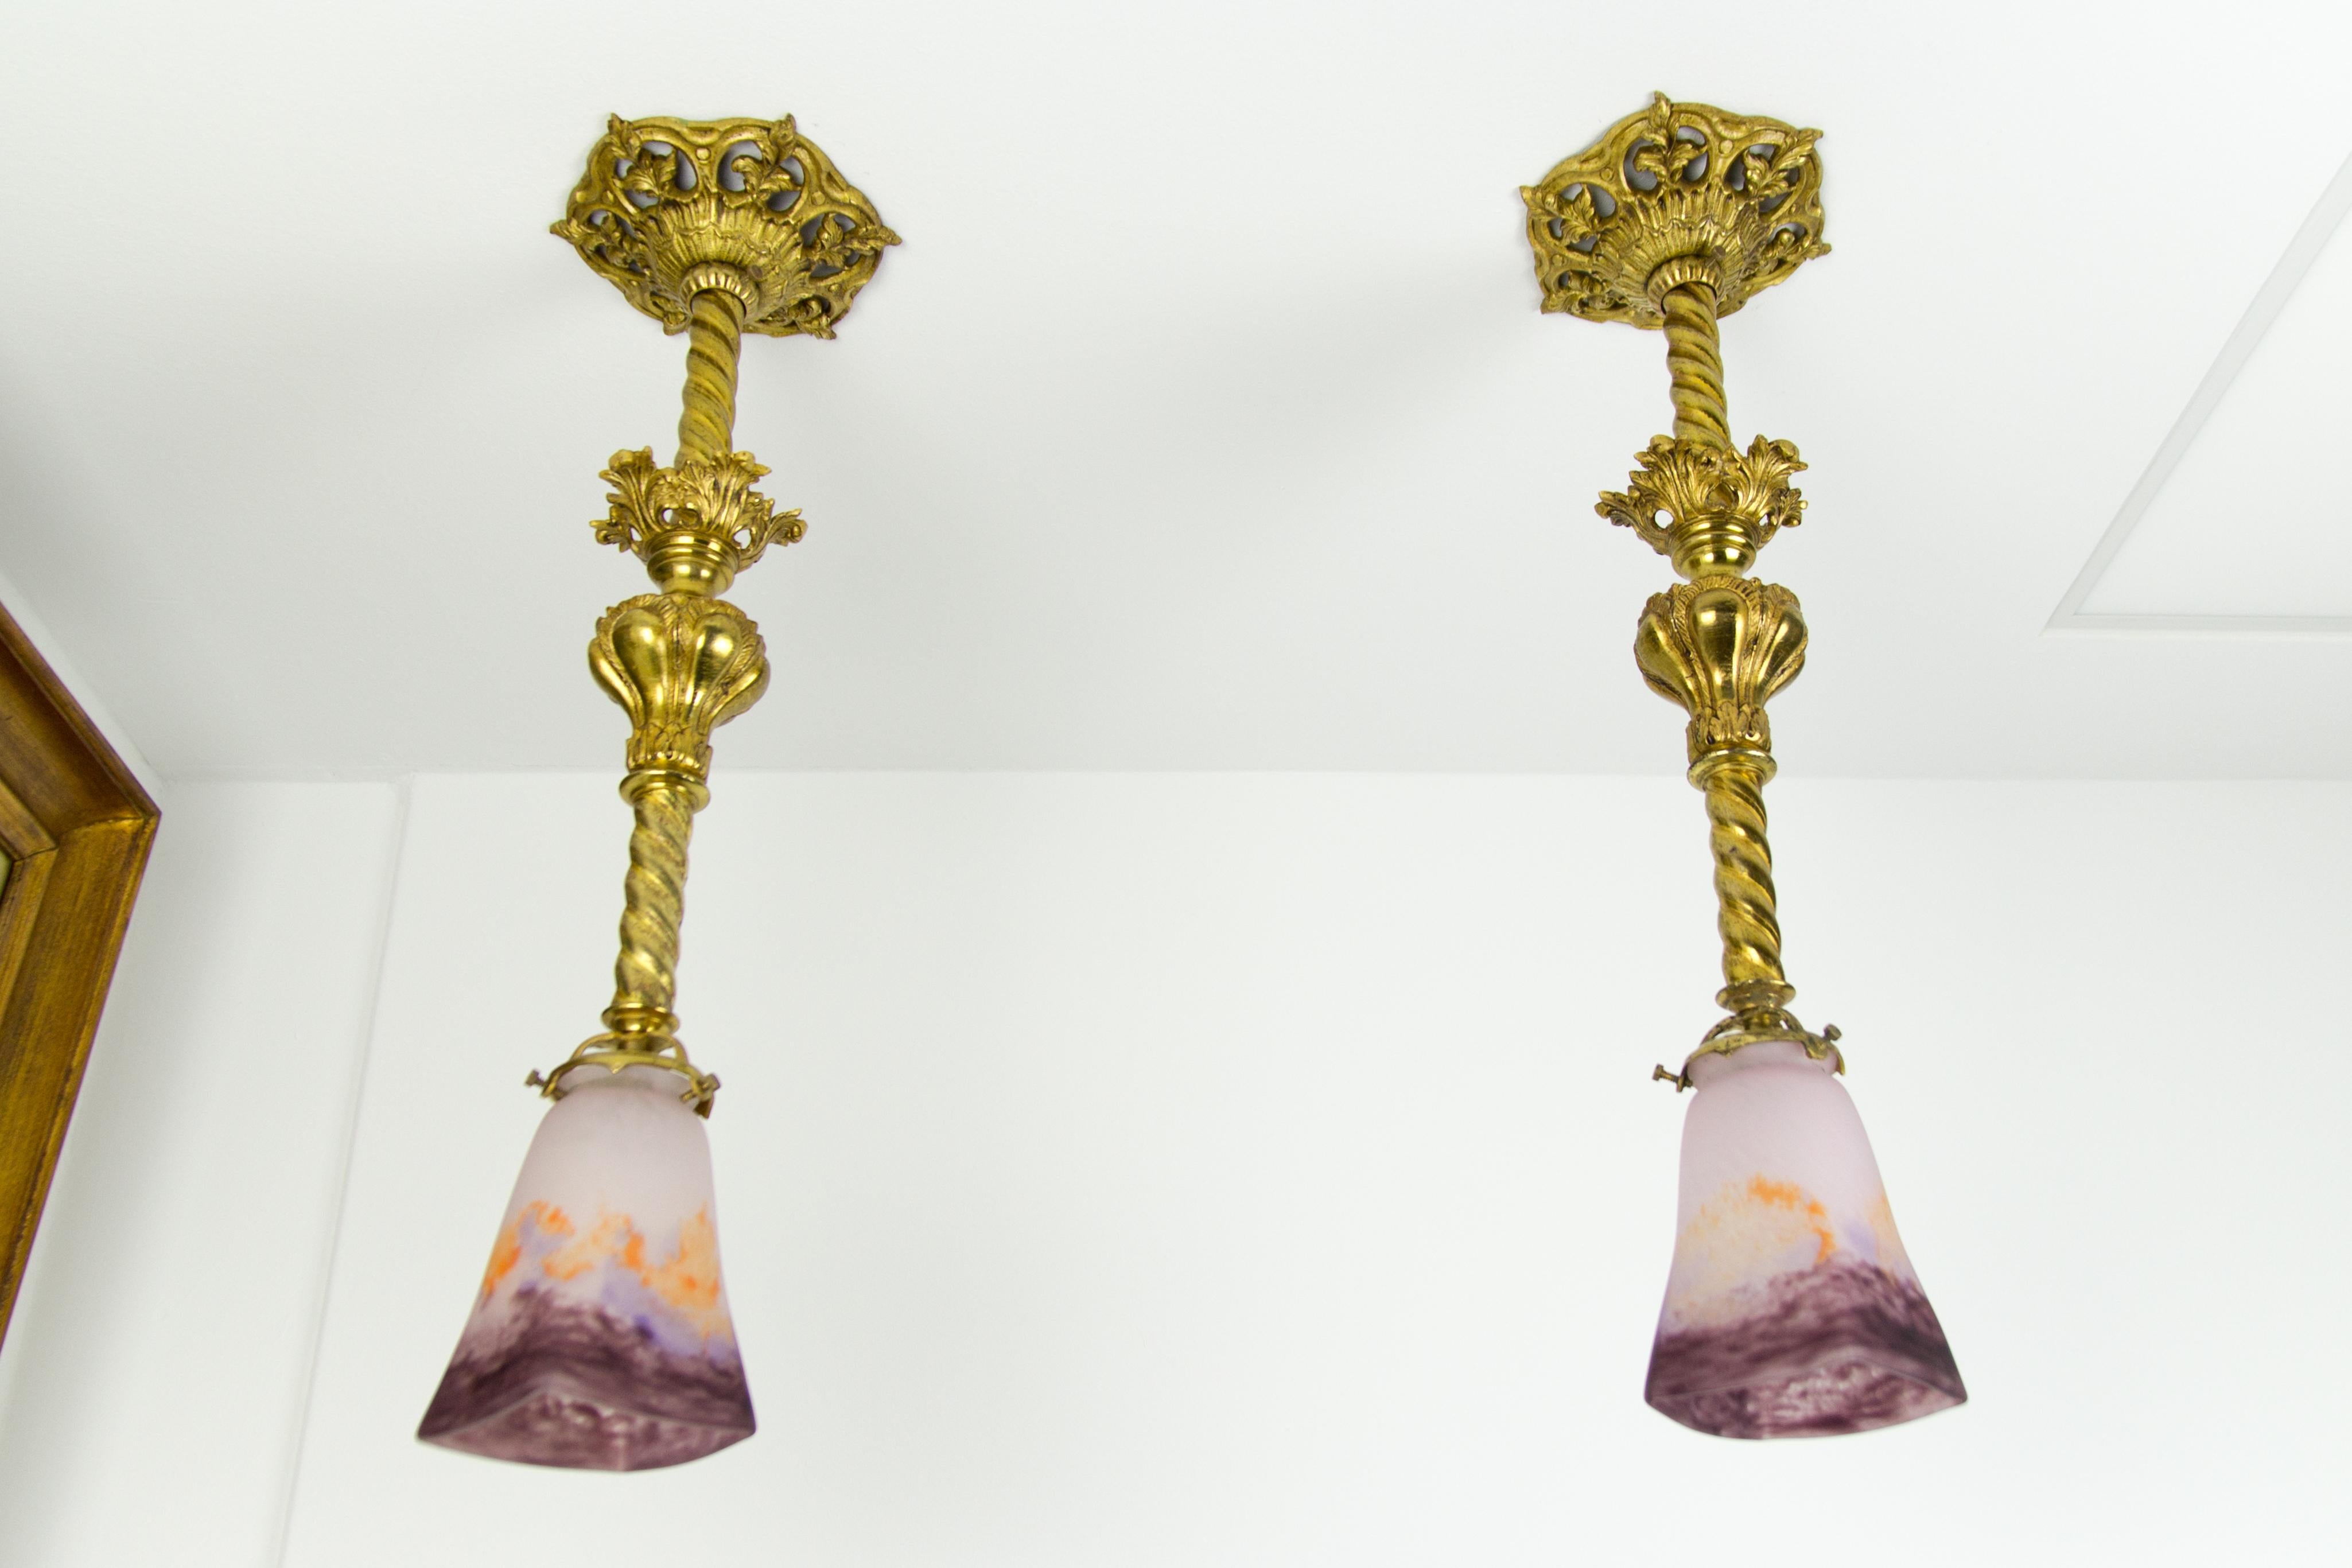 Art Nouveau French Muller-Strasbourg Glass and Gilt Bronze Pendant Light Fixtures, a Pair For Sale